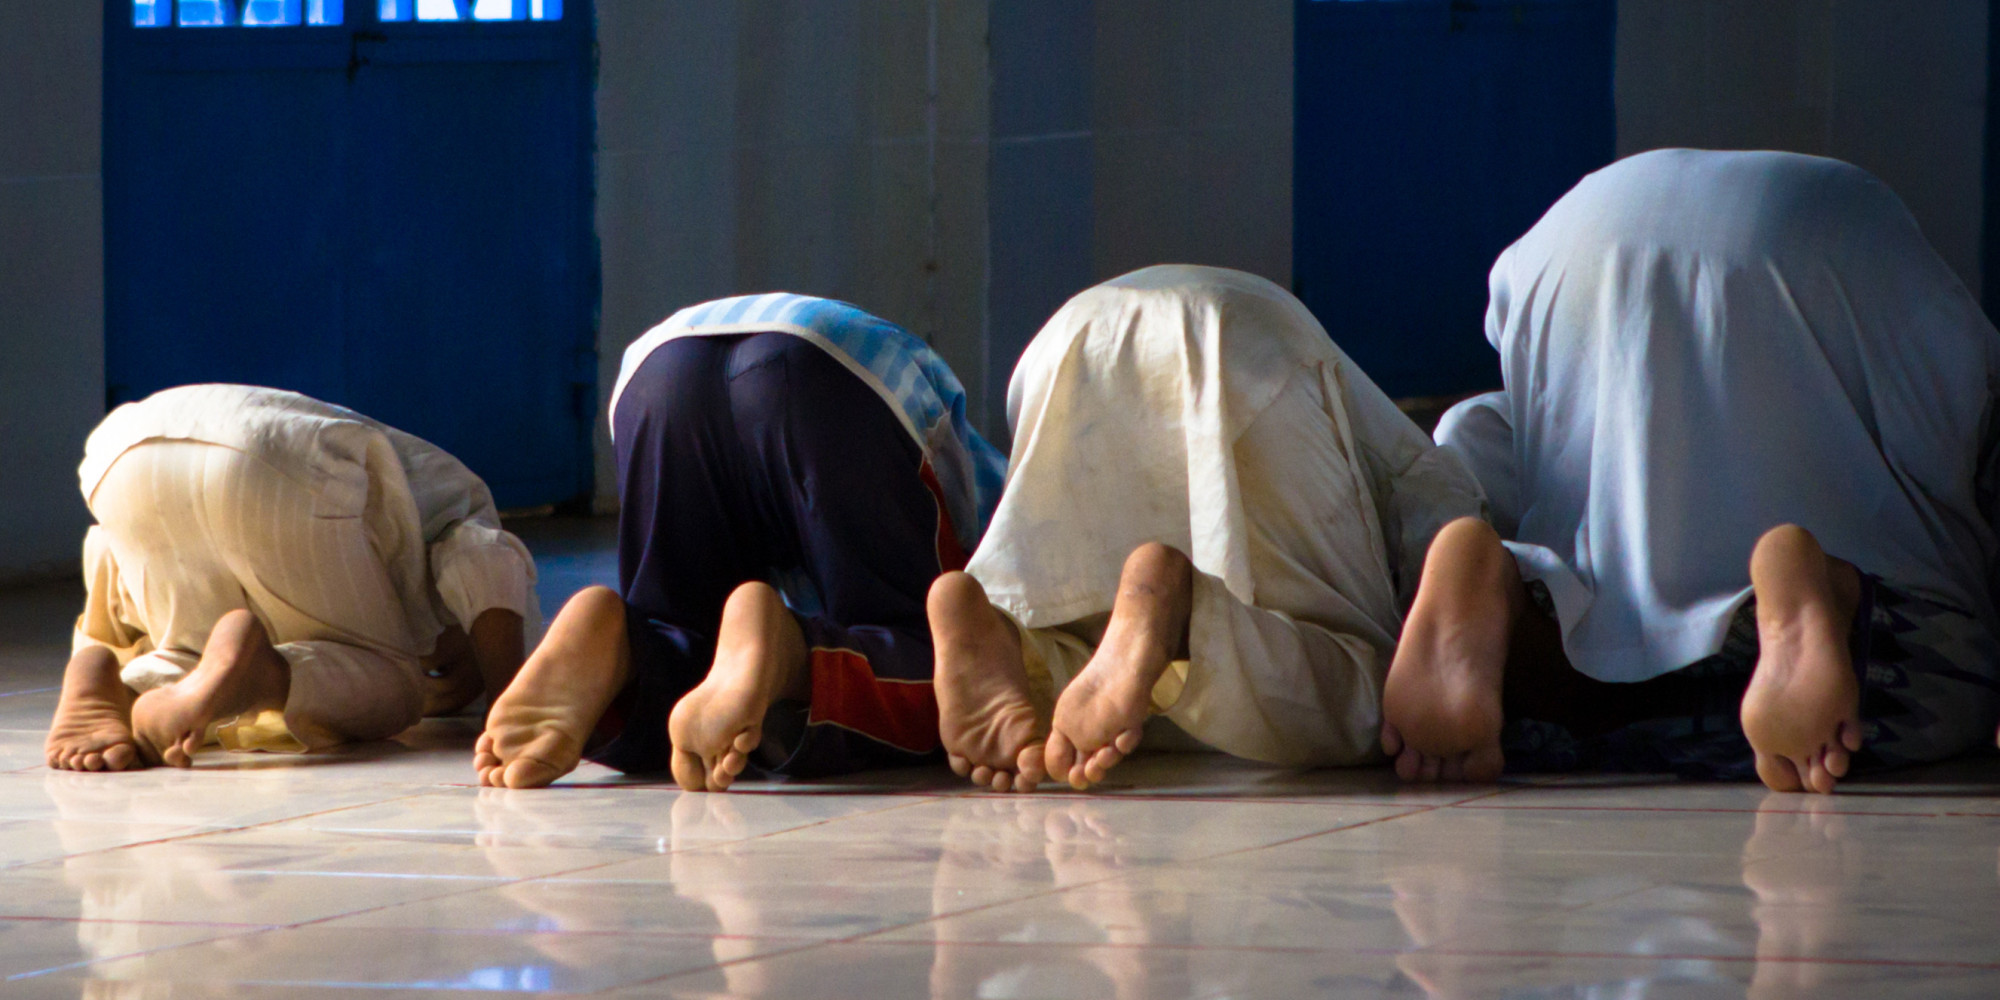  Muslim men and women are seen praying in a mosque.